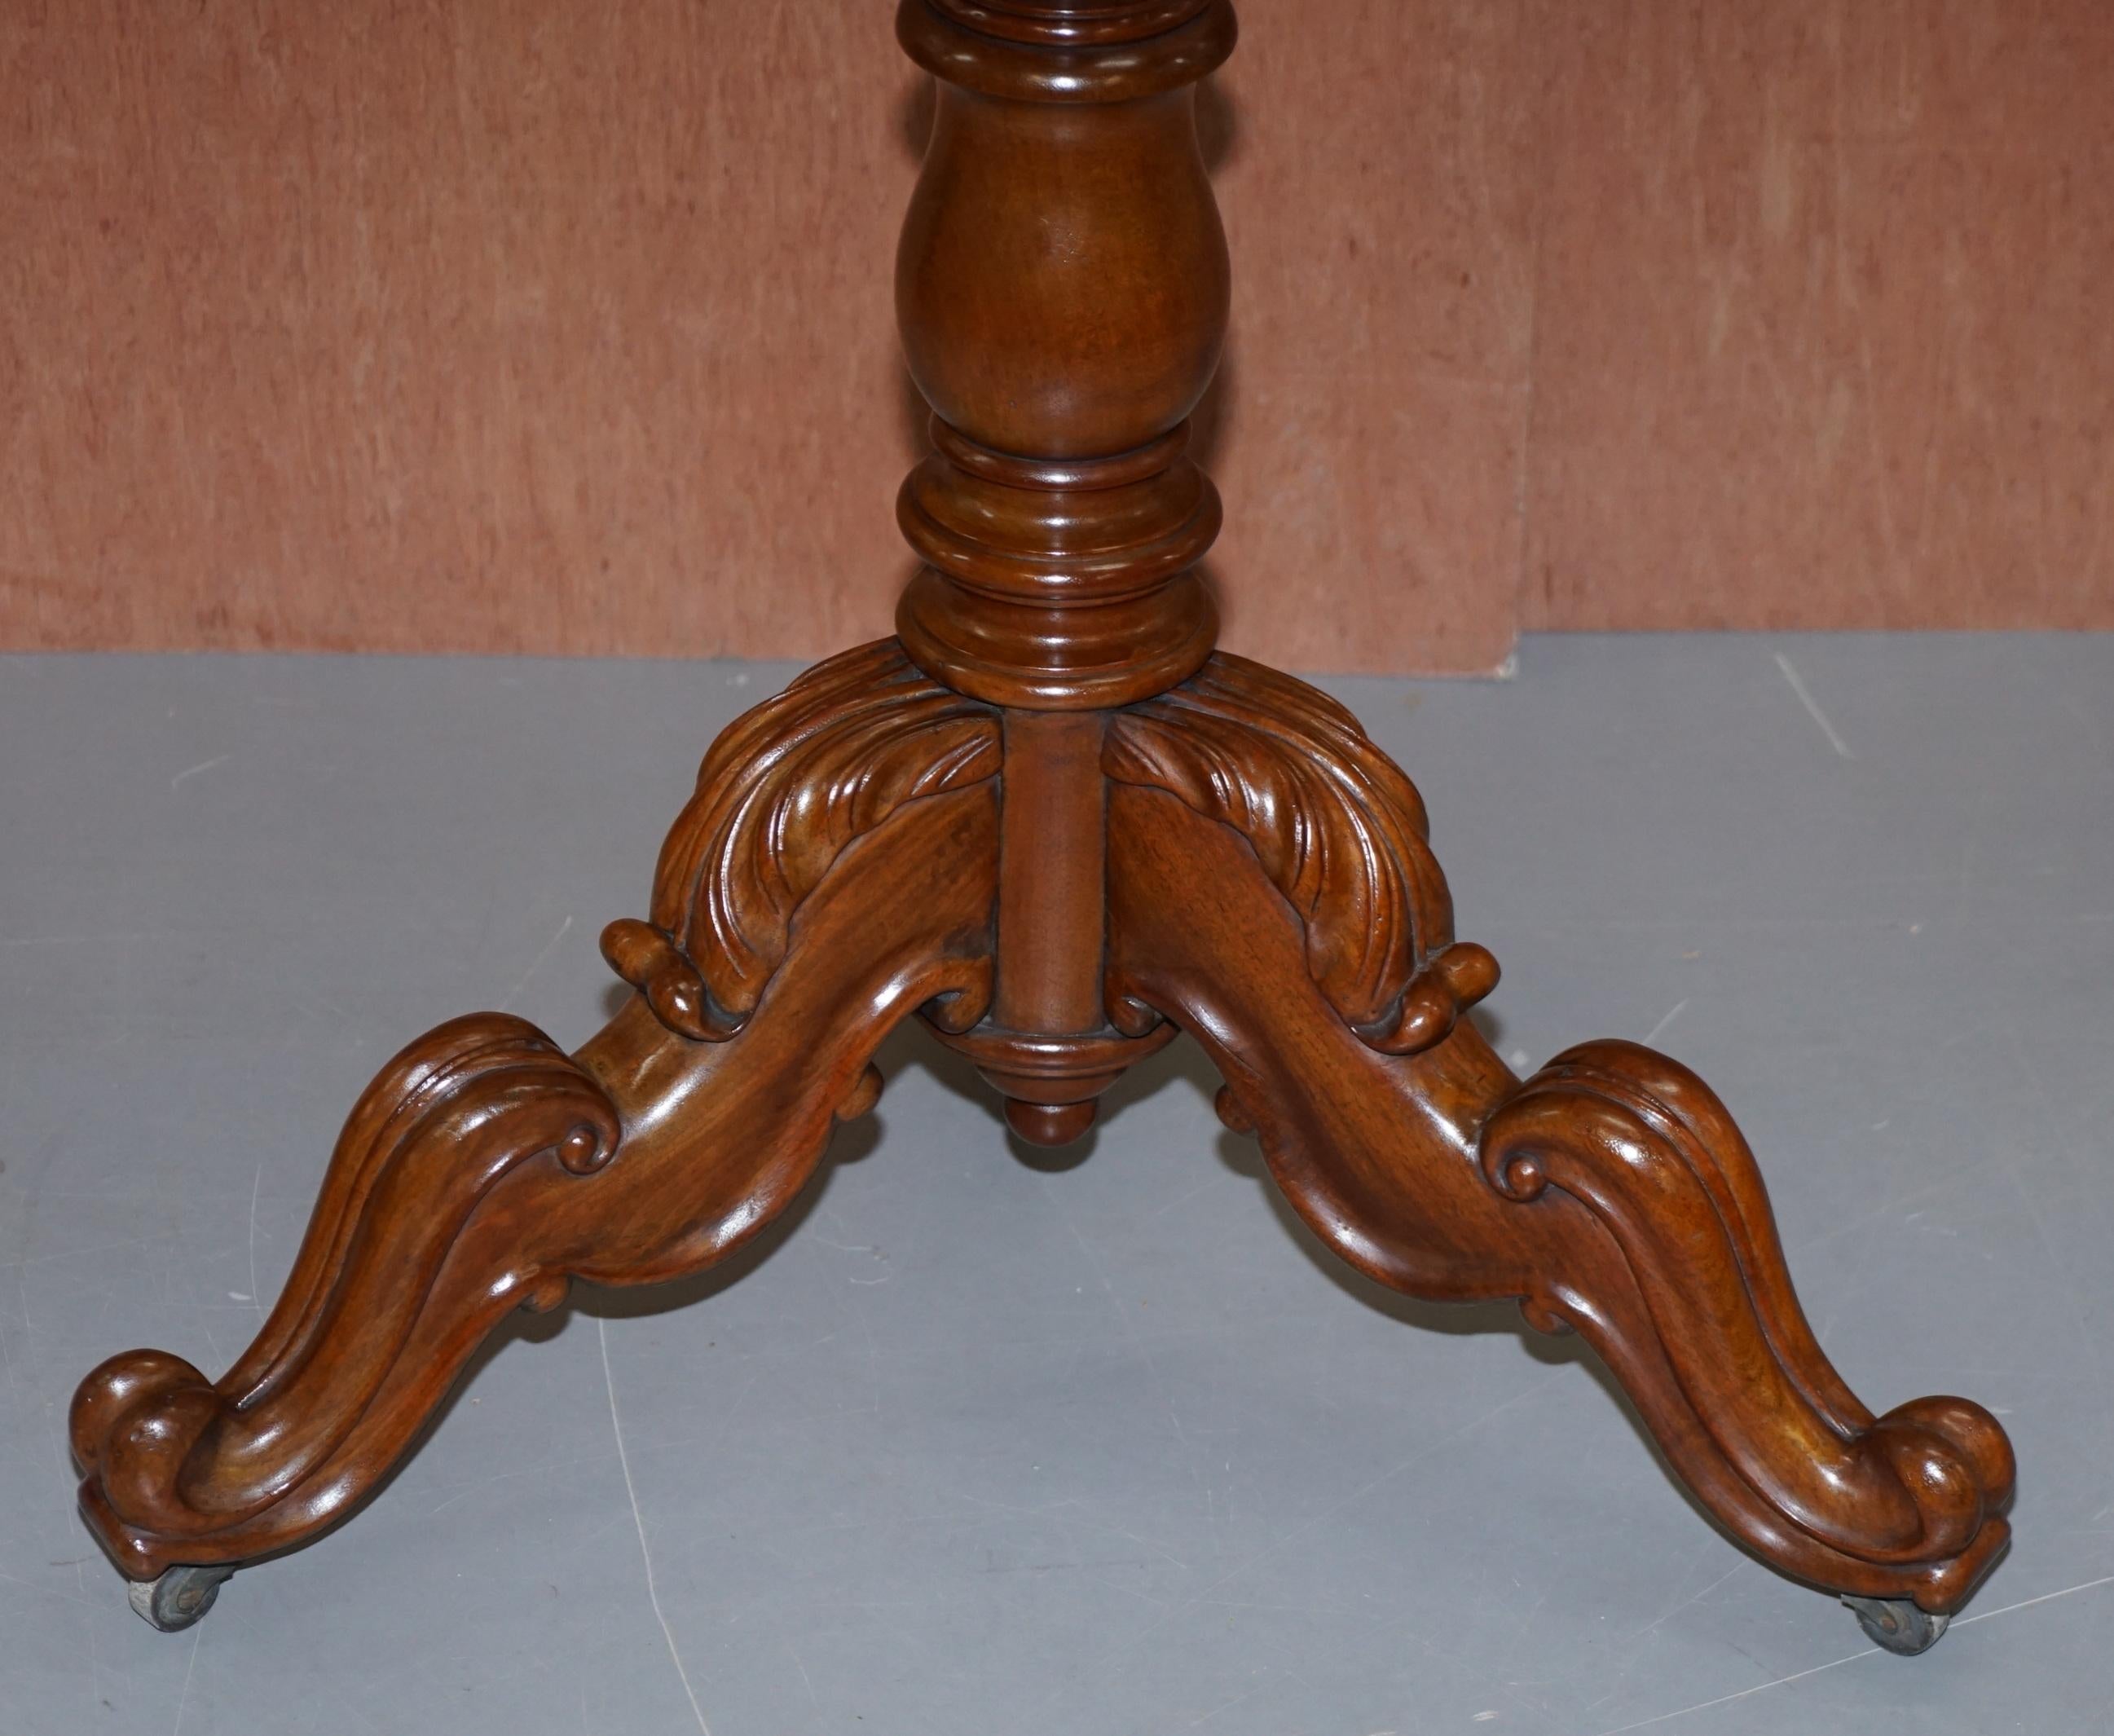 We are delighted to offer for sale this original fully restored one of a kind custom made Victorian circa 1860 French walnut revolving coat, hat and umbrella rack with ornately carved tripod base and barley twist body

This is in my opinion the